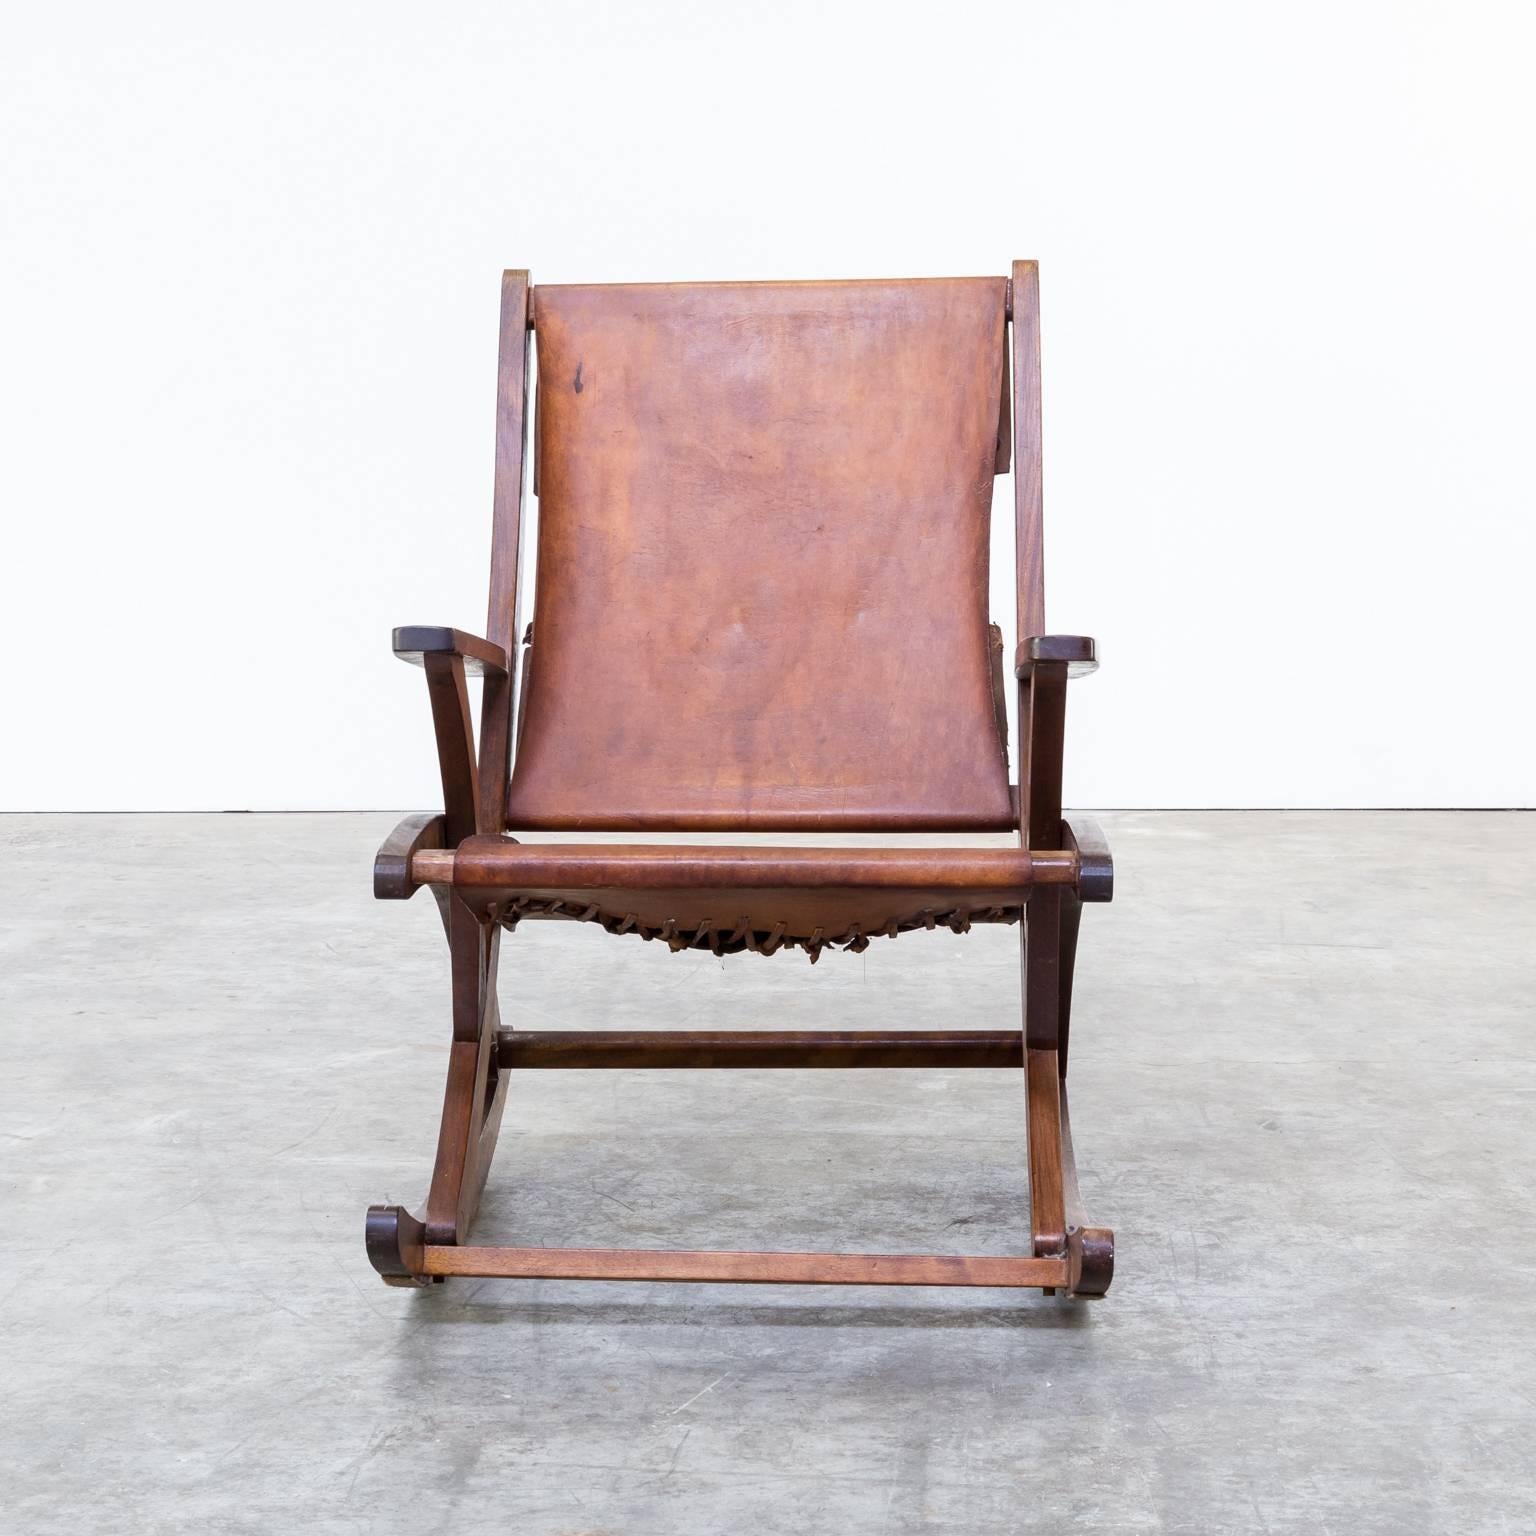 Mid-Century oak and saddle leather rocking chair. Beautiful frame and cognac colored saddle leather. Dimensions: 60cm W x 92cm D x 88.5cm H, seat H 33cm.